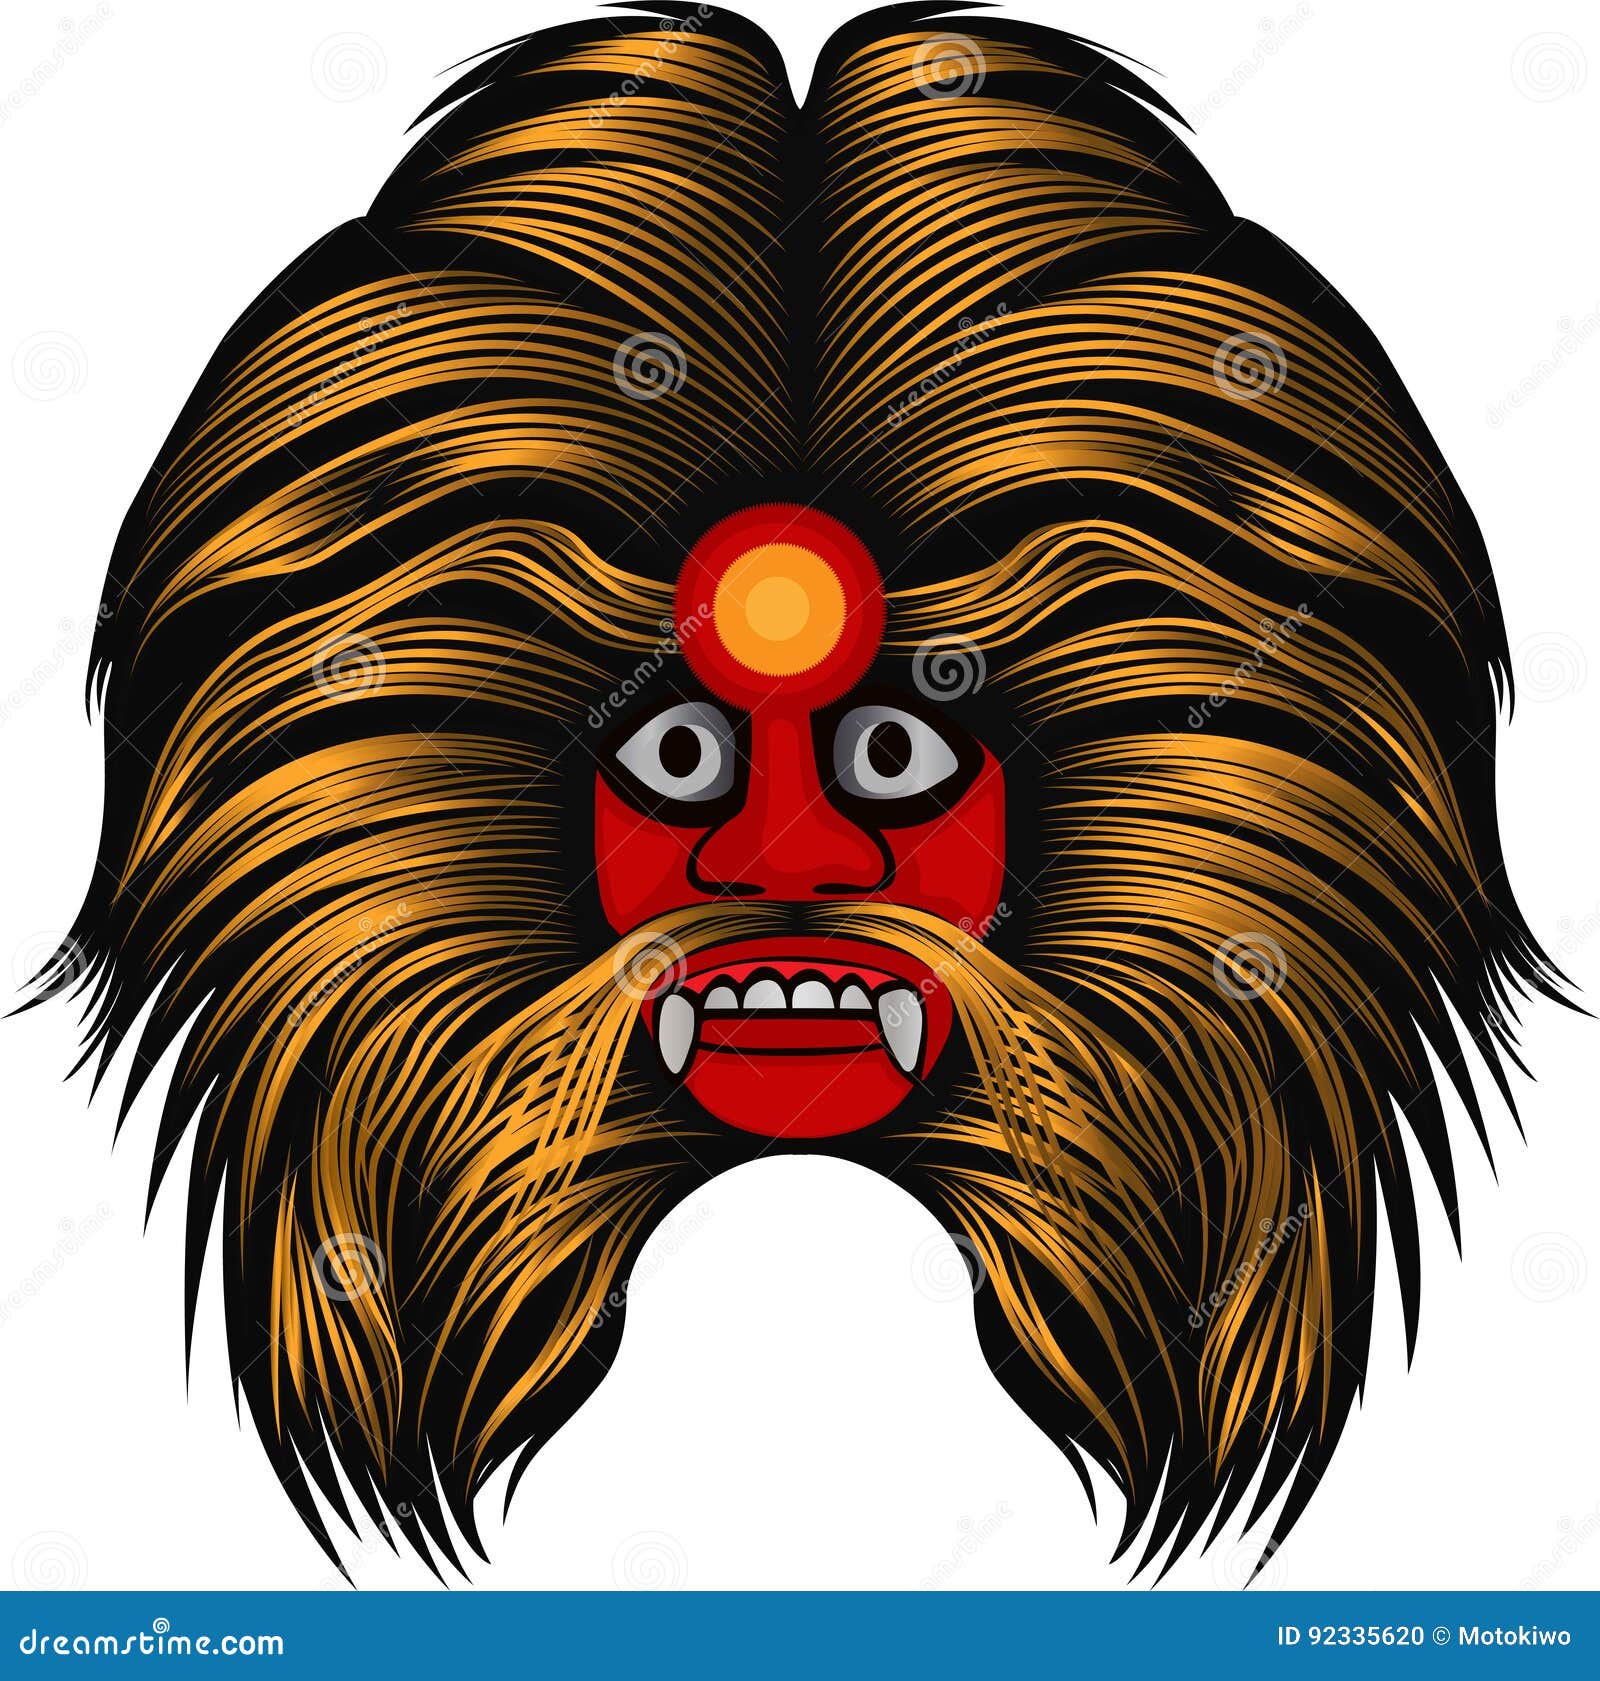 Reog Cartoons, Illustrations & Vector Stock Images - 14 